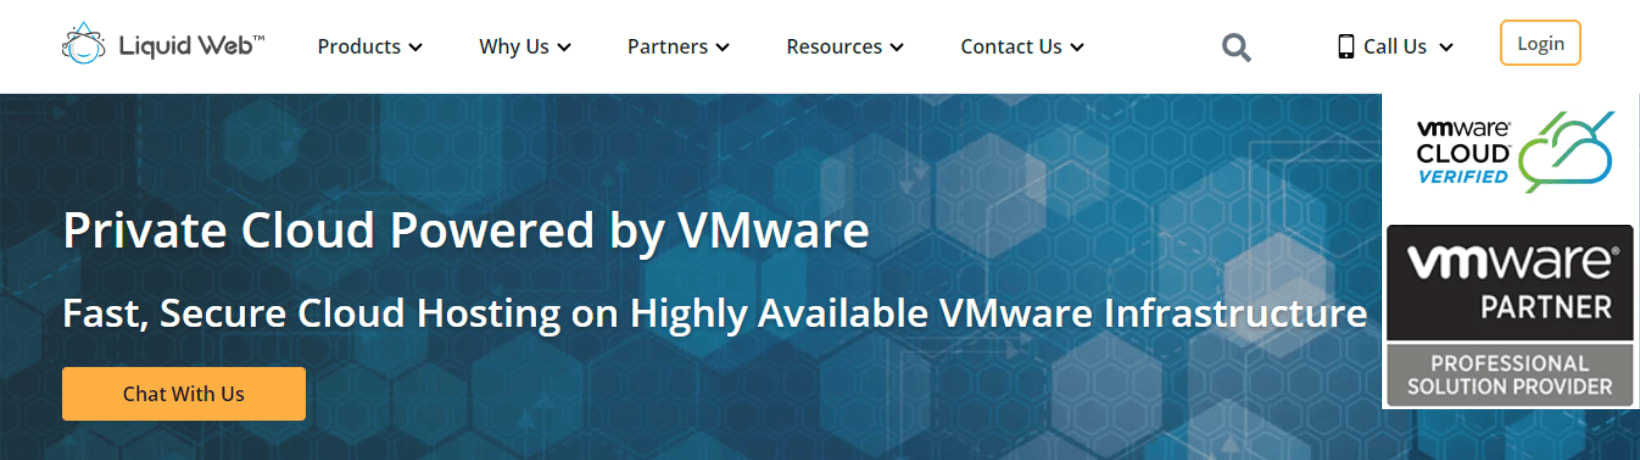 Liquid Web’s Private Cloud Powered by VMware.